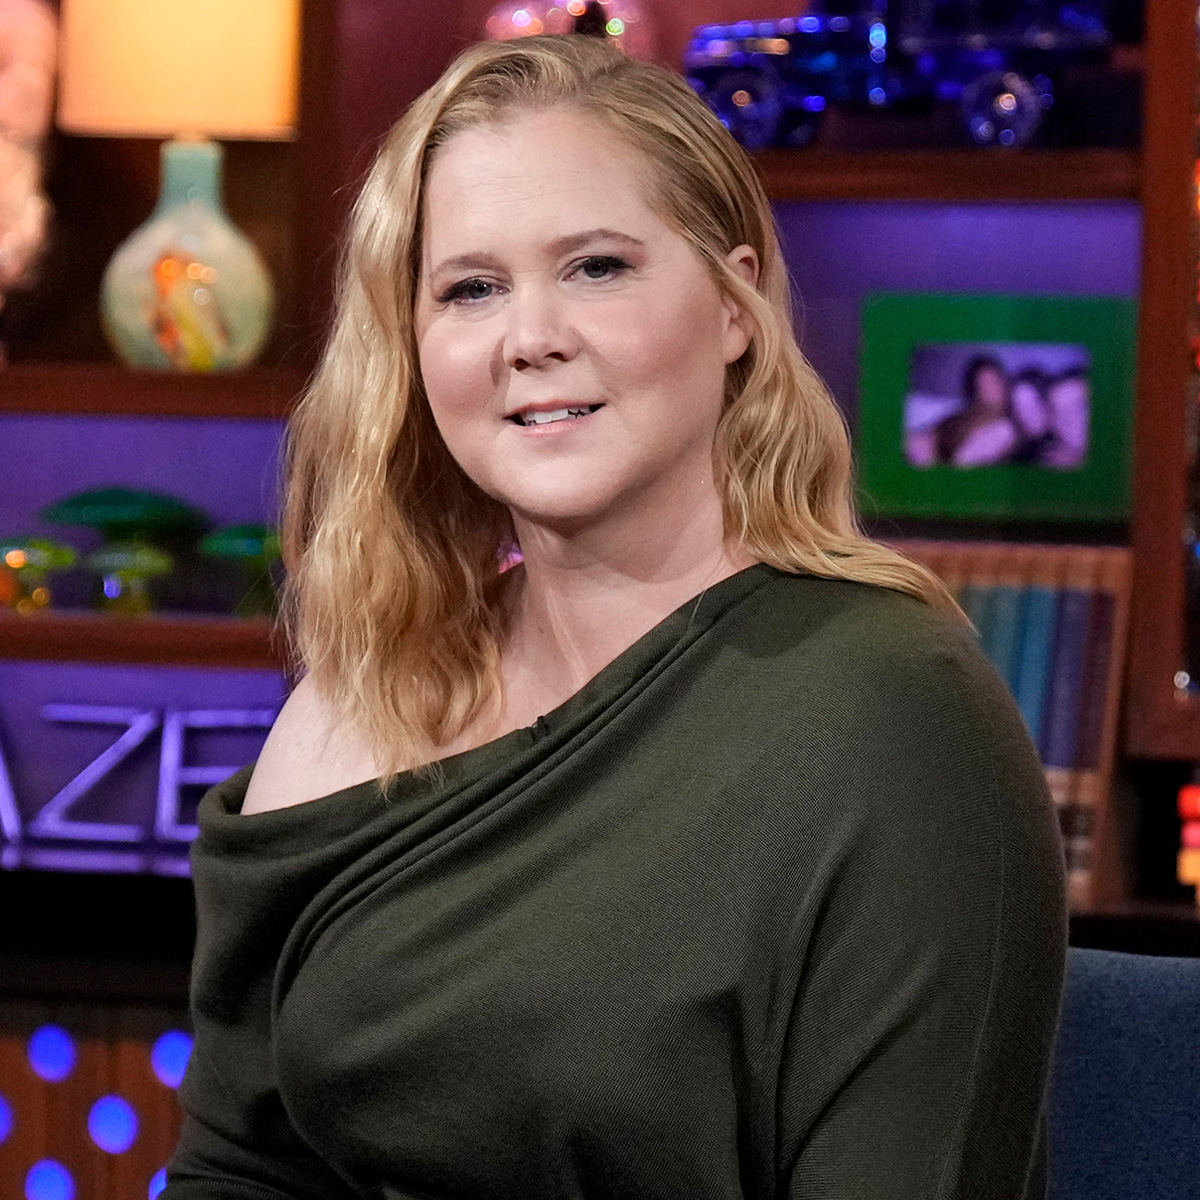 Amy Schumer Calls Out Critics Mad” She's Not Thinner & Prettier